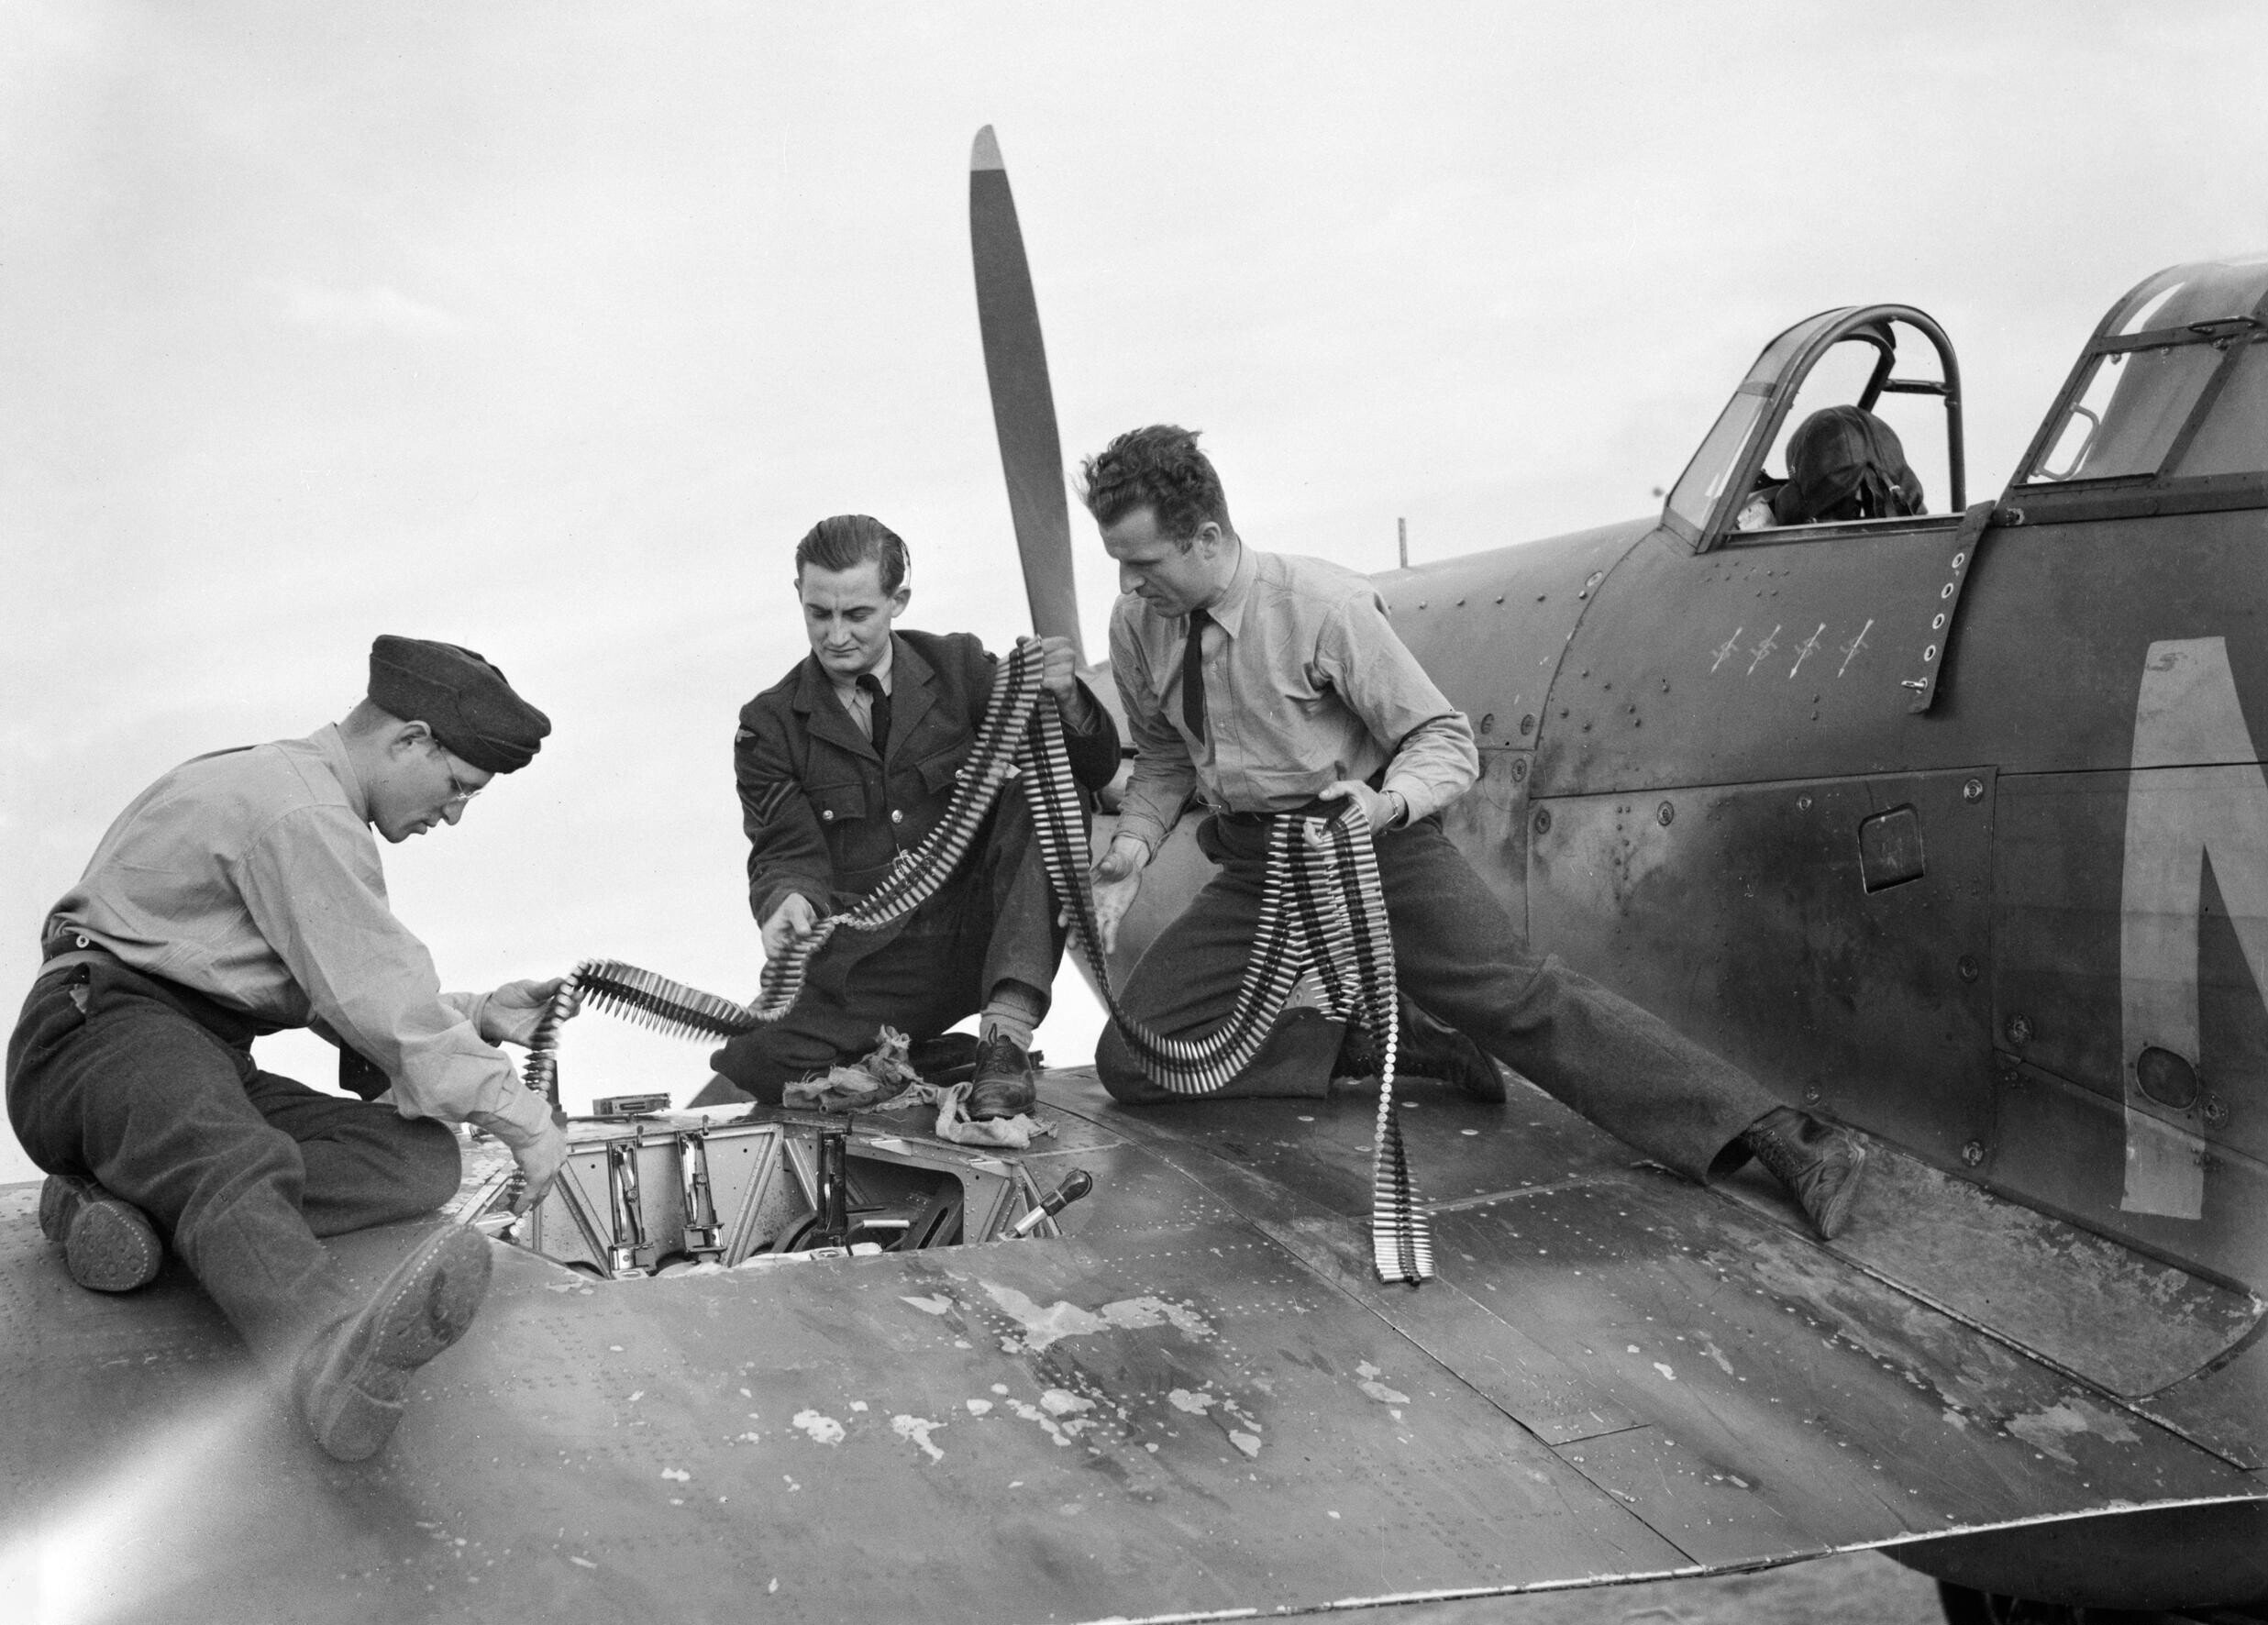 Armourers_replenish_the_ammunition_in_a_Hawker_Hurricane_Mk_I_of_No._310_(Czechoslovak)_Squadron_RAF_at_Duxford,_Cambridgeshire,_7_September_1940._CH1297.jpg